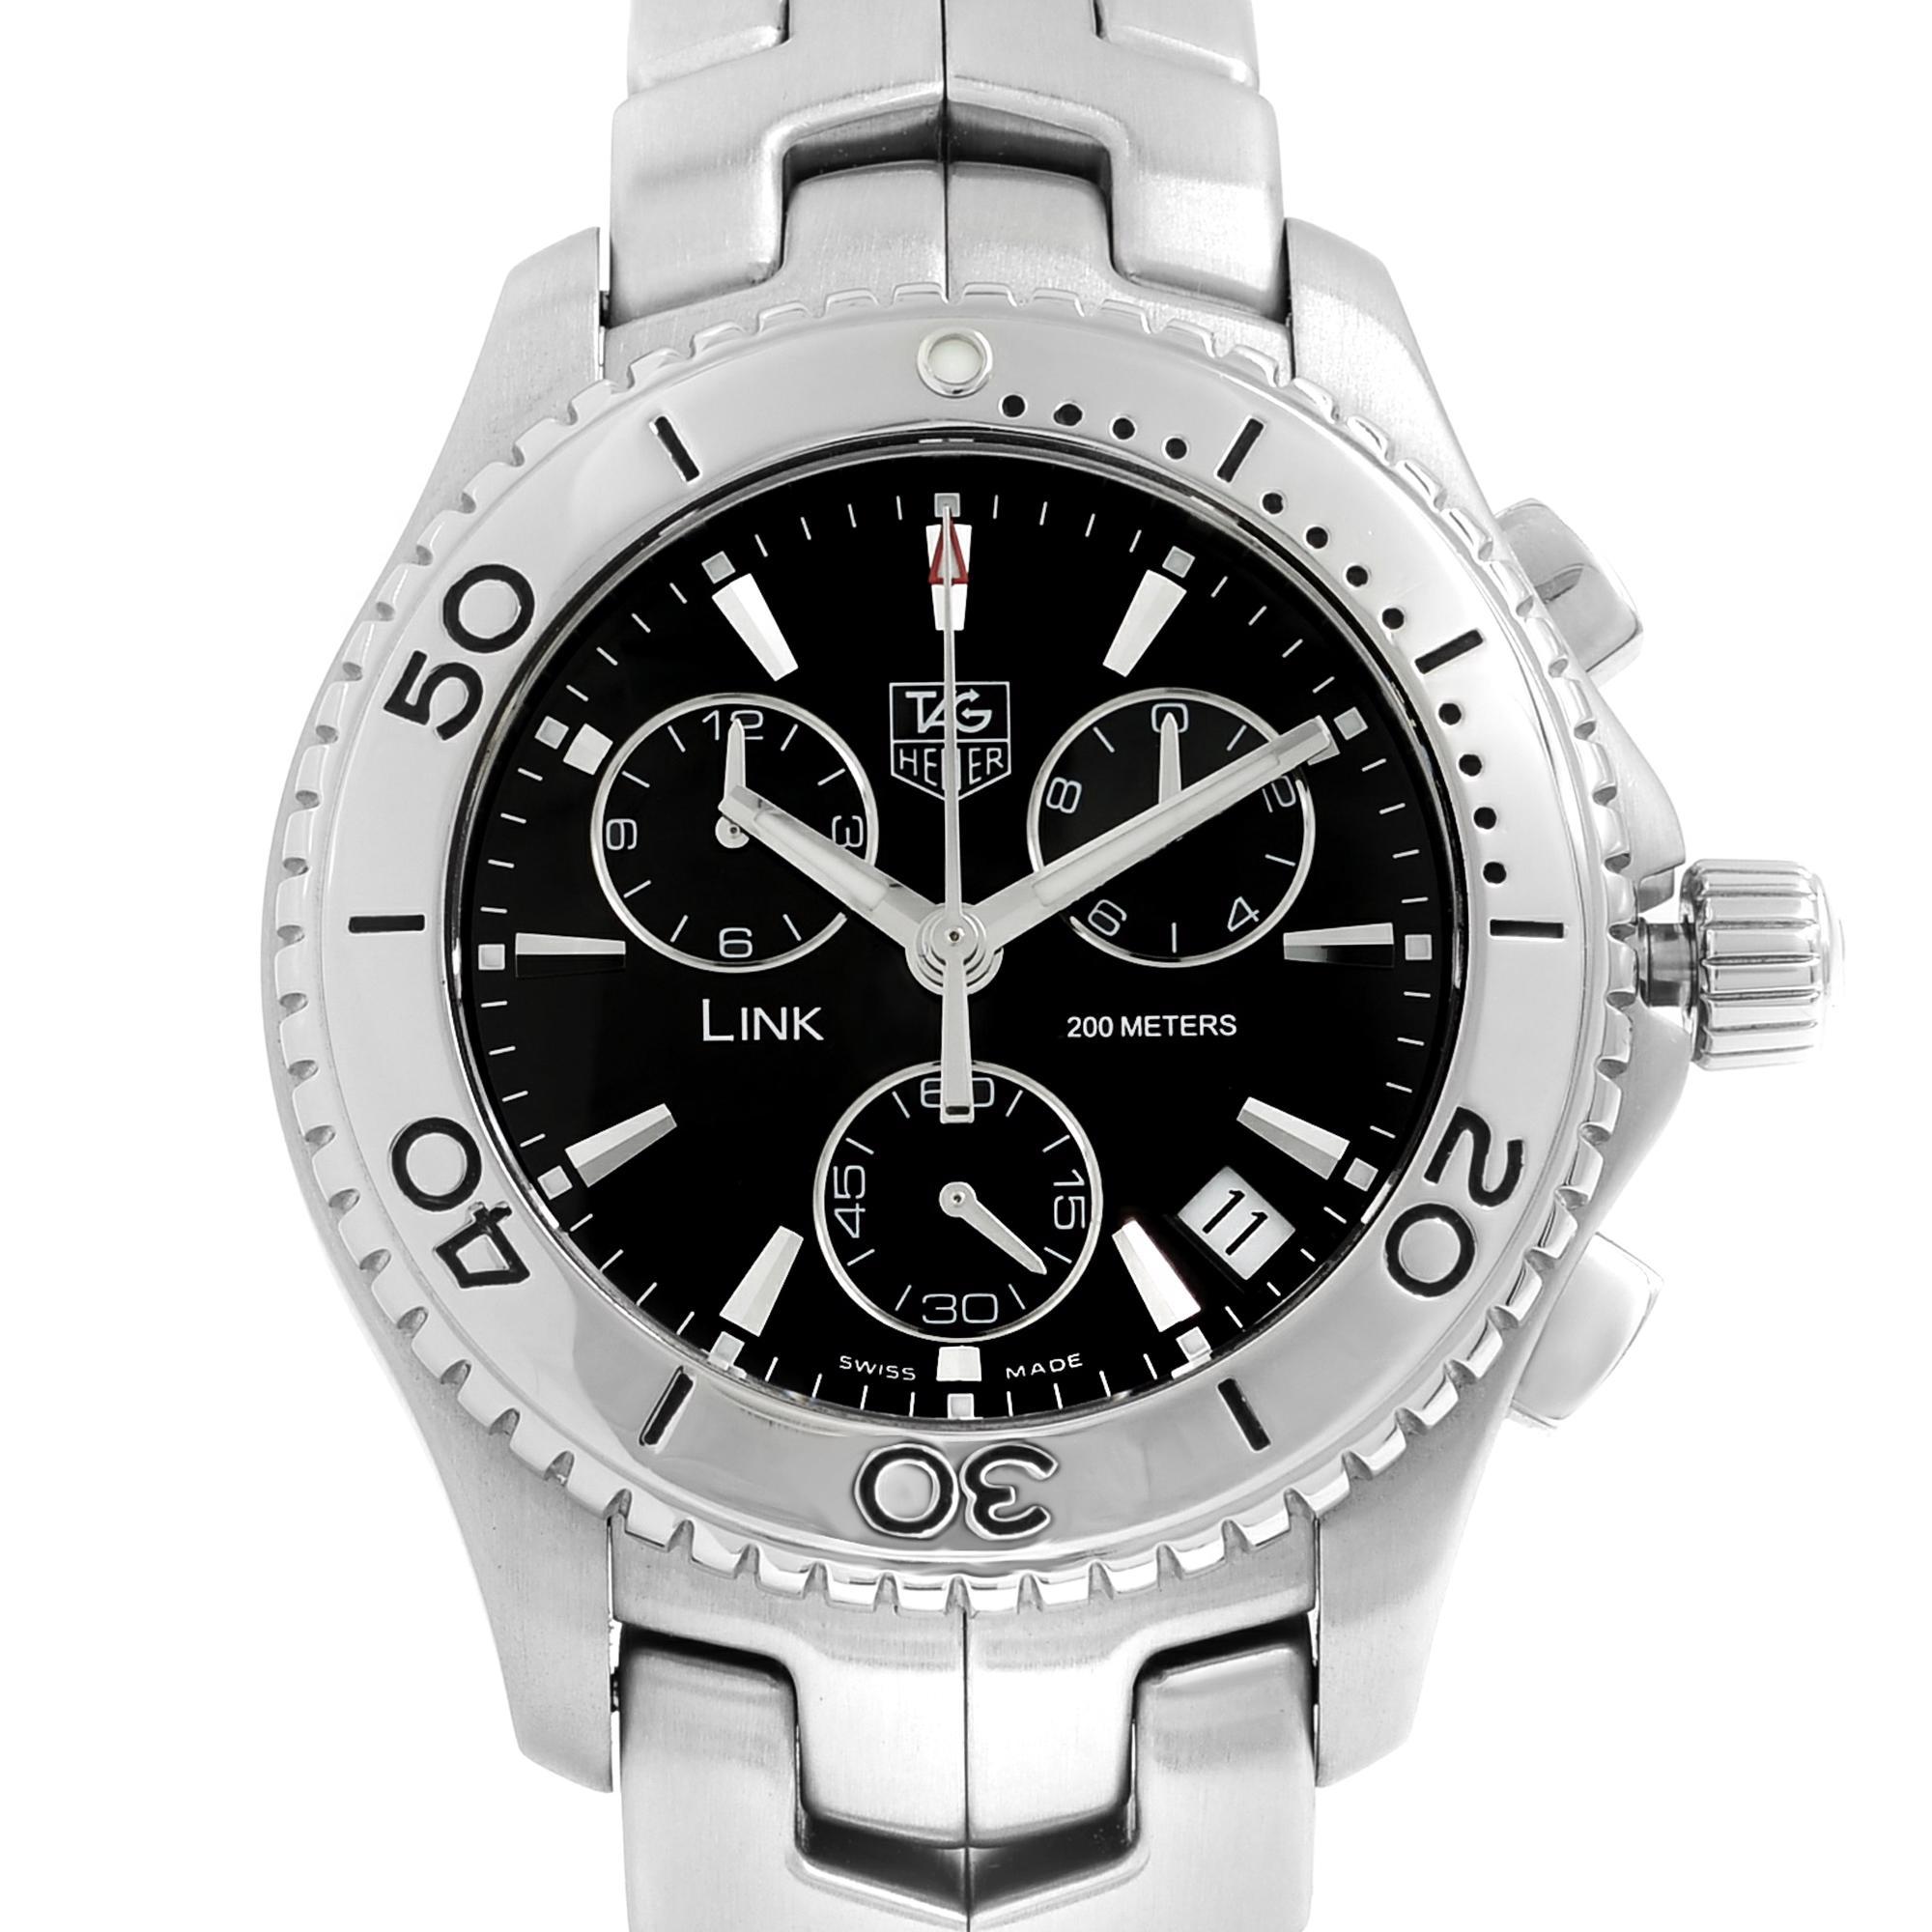 Pre-owned Tag Heuer Link Chronograph 42mm Stainless Steel Black Dial Mens Quartz Watch CJ1110.BA0576. This Beautiful Timepiece is Powered by Quartz (Battery) Movement and Features: Stainless Steel Case and Bracelet. Unidirectional rotating Stainless